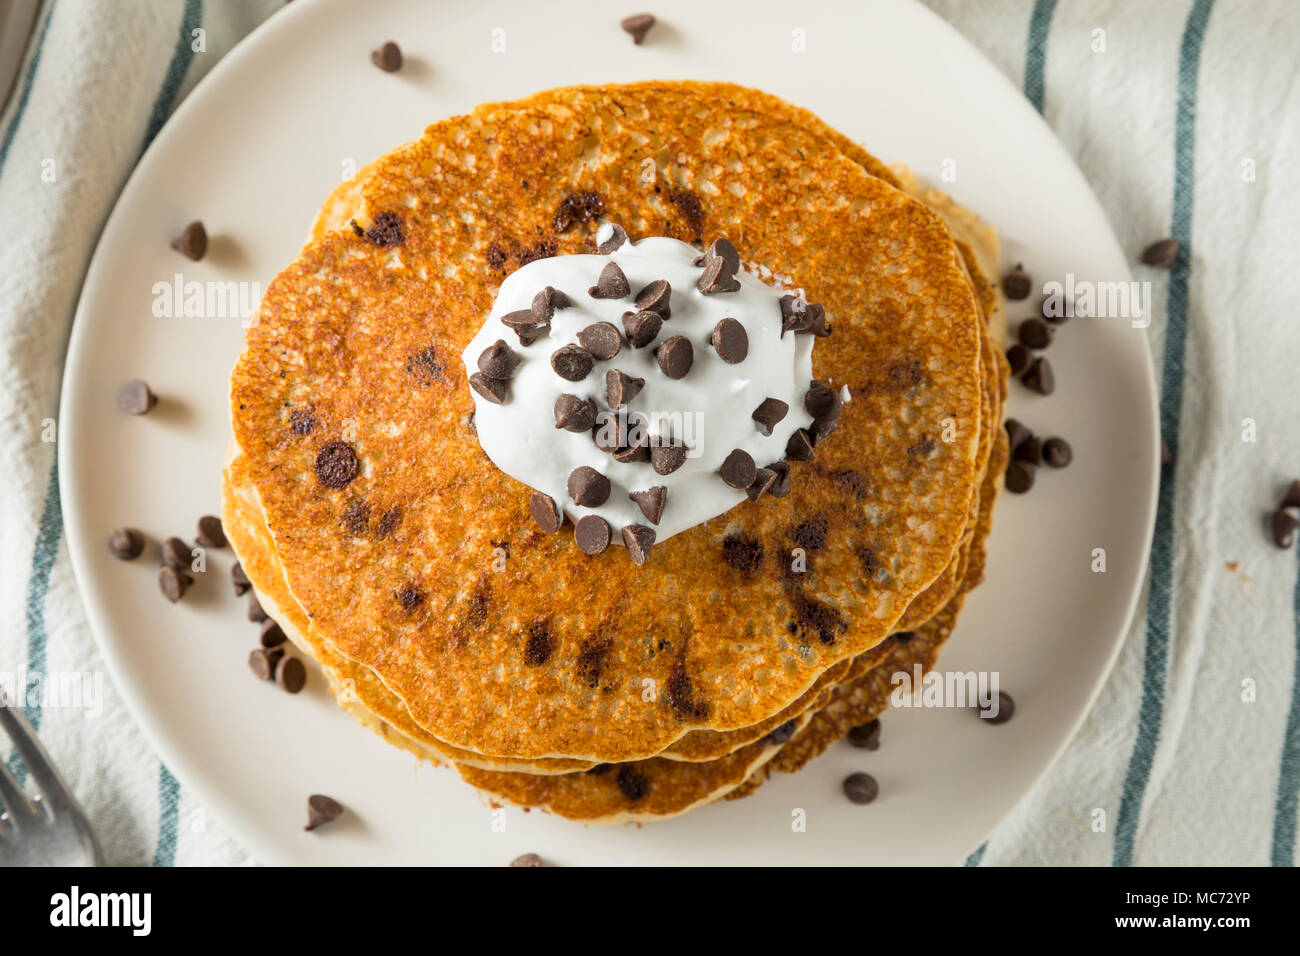 Homemade Chocolate Chip Pancakes with Whipped Cream Stock Photo